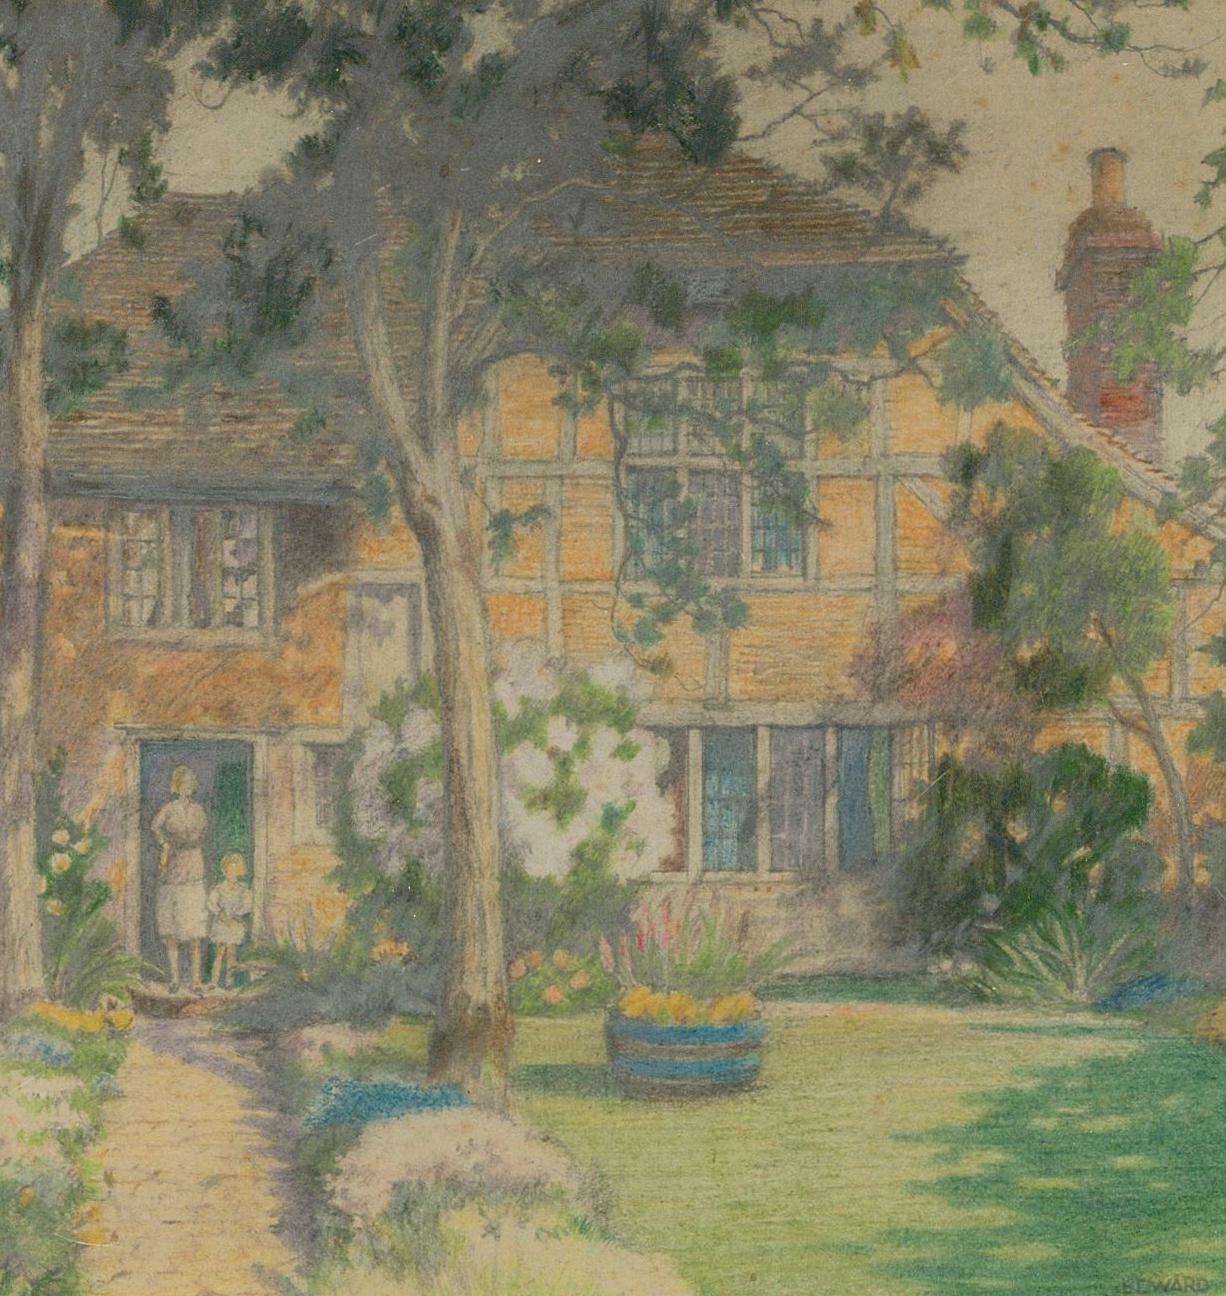 A detailed depiction of a large country house by listed British artist Edward Walker (1879-1955). The scene shows a mother and daughter on the front step of their grand country home with summer borders down either side of a sweeping front lawn and